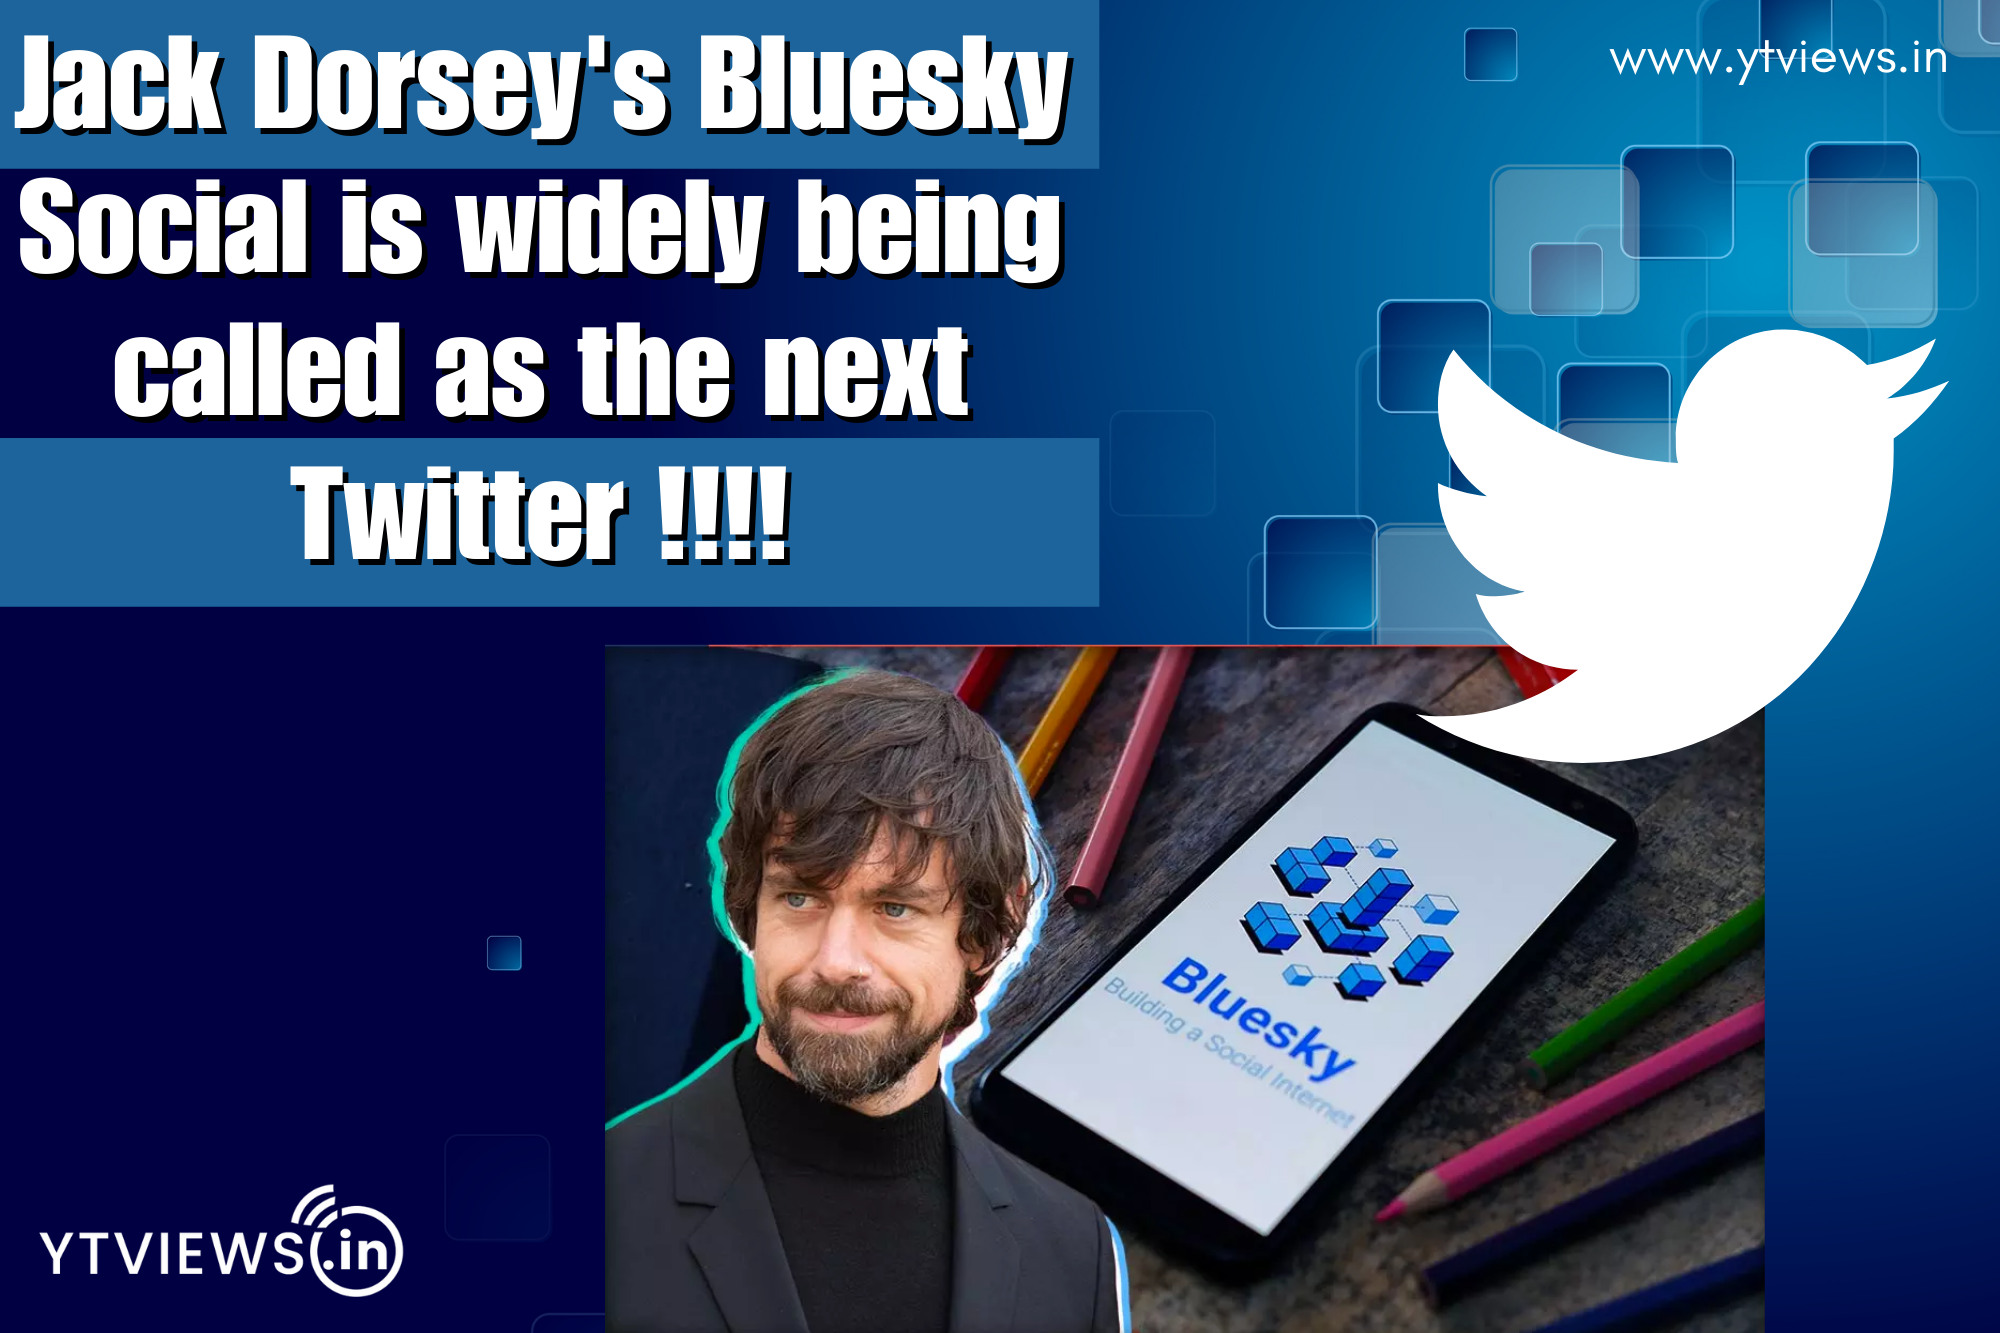 Jack Dorsey’s Bluesky social is widely being called as the next Twitter/X